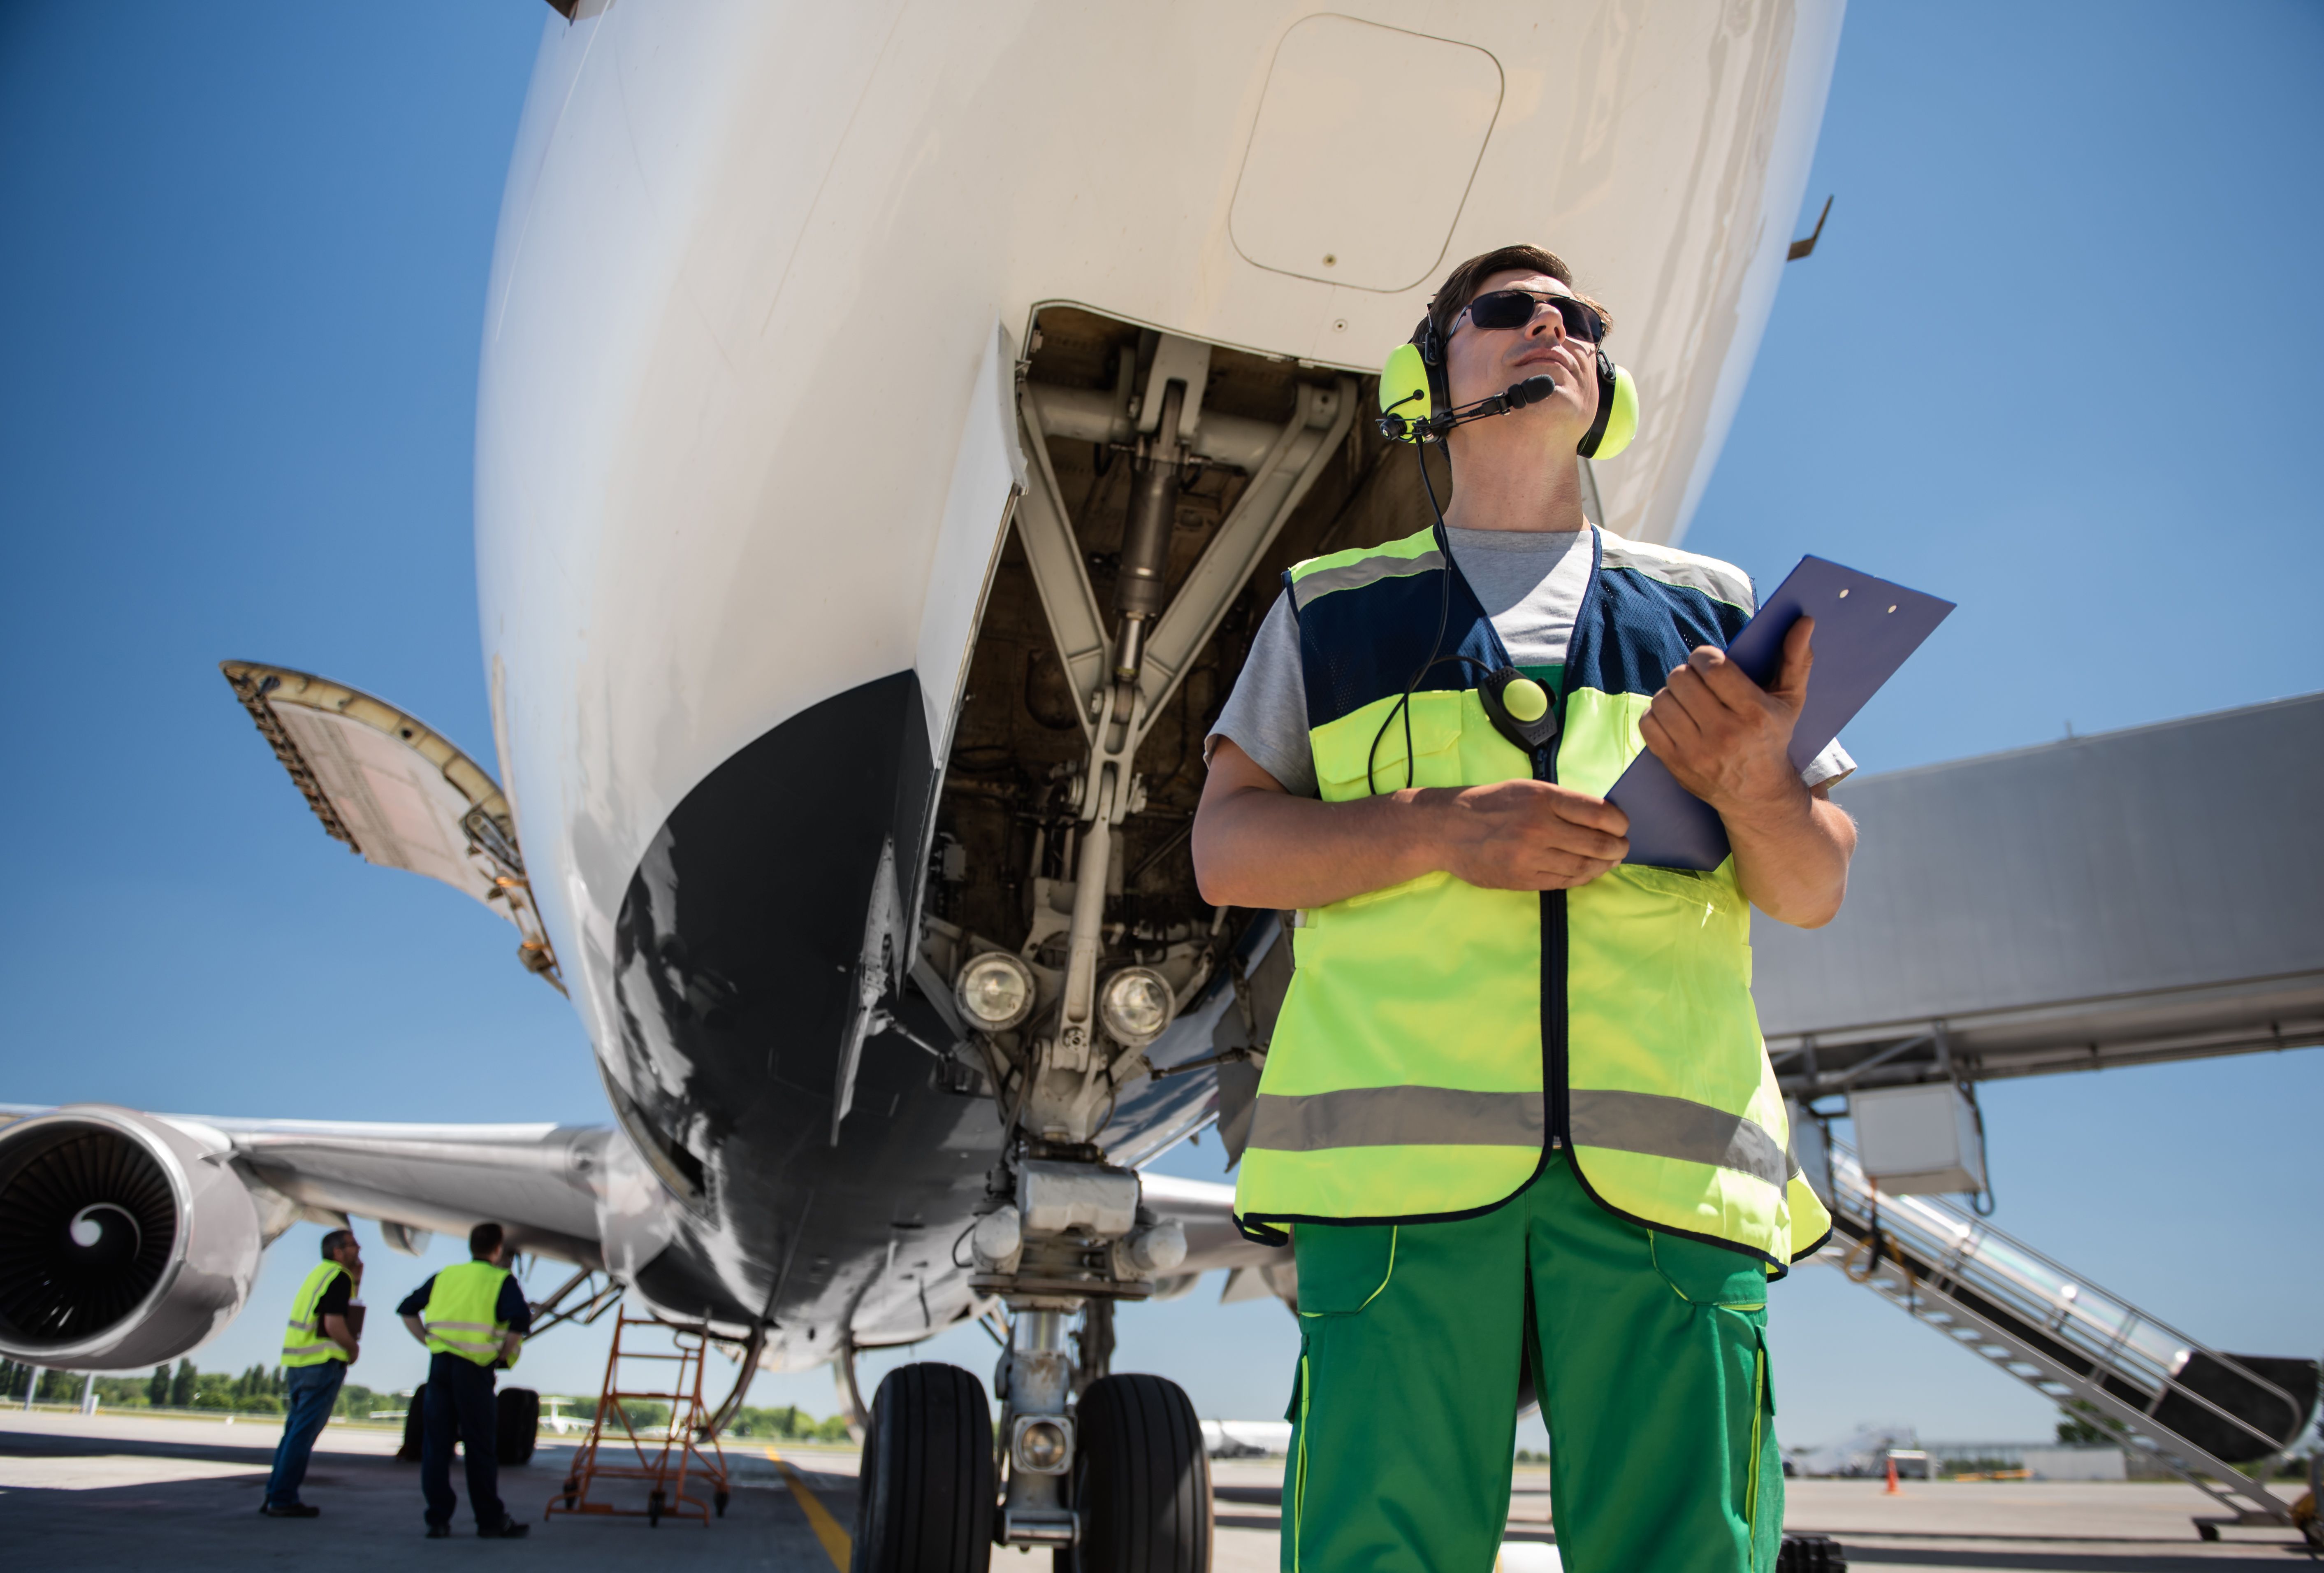 Preparation for the flight. Low angle portrait of man in sunglasses holding documents and posing near aircraft with open door. Ground crewmembers standing behind 